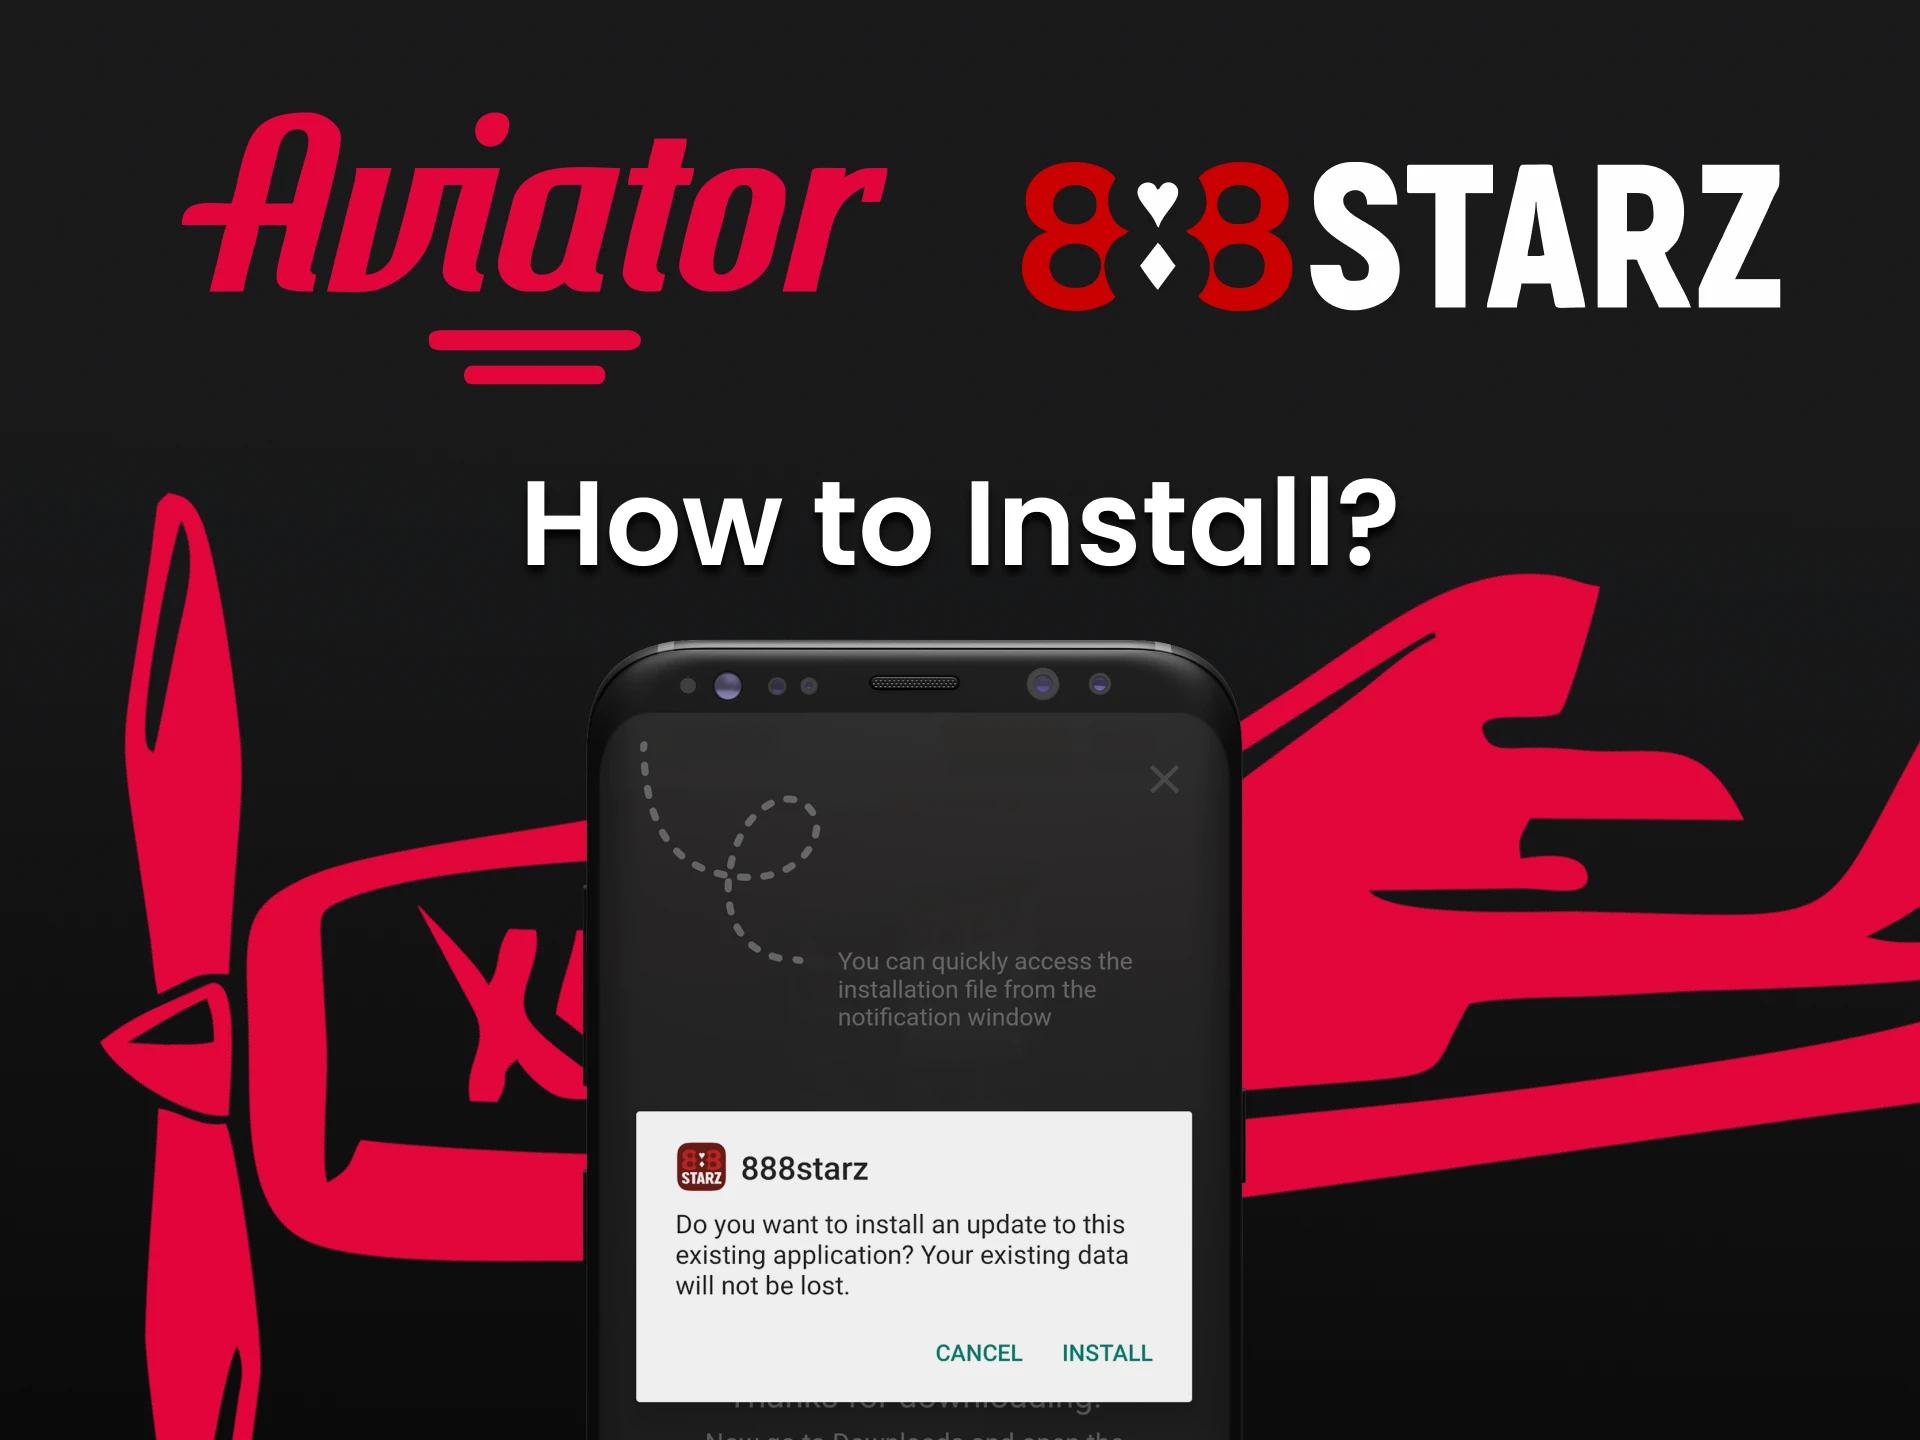 Follow the instructions to install the 888starz app.